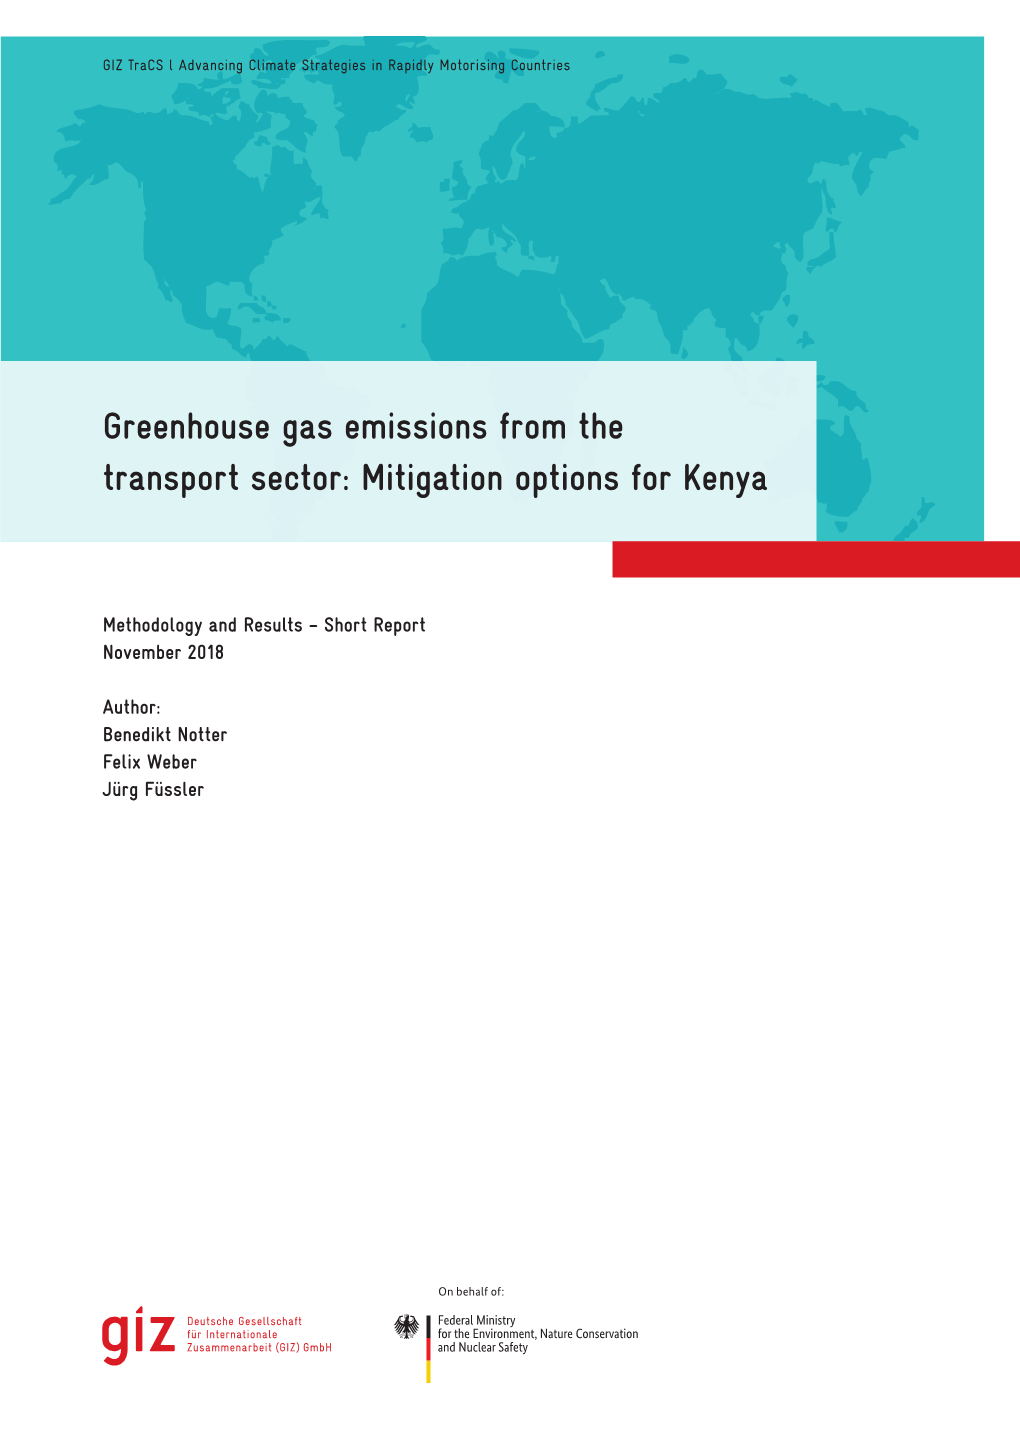 Greenhouse Gas Emissions from the Transport Sector: Mitigation Options for Kenya